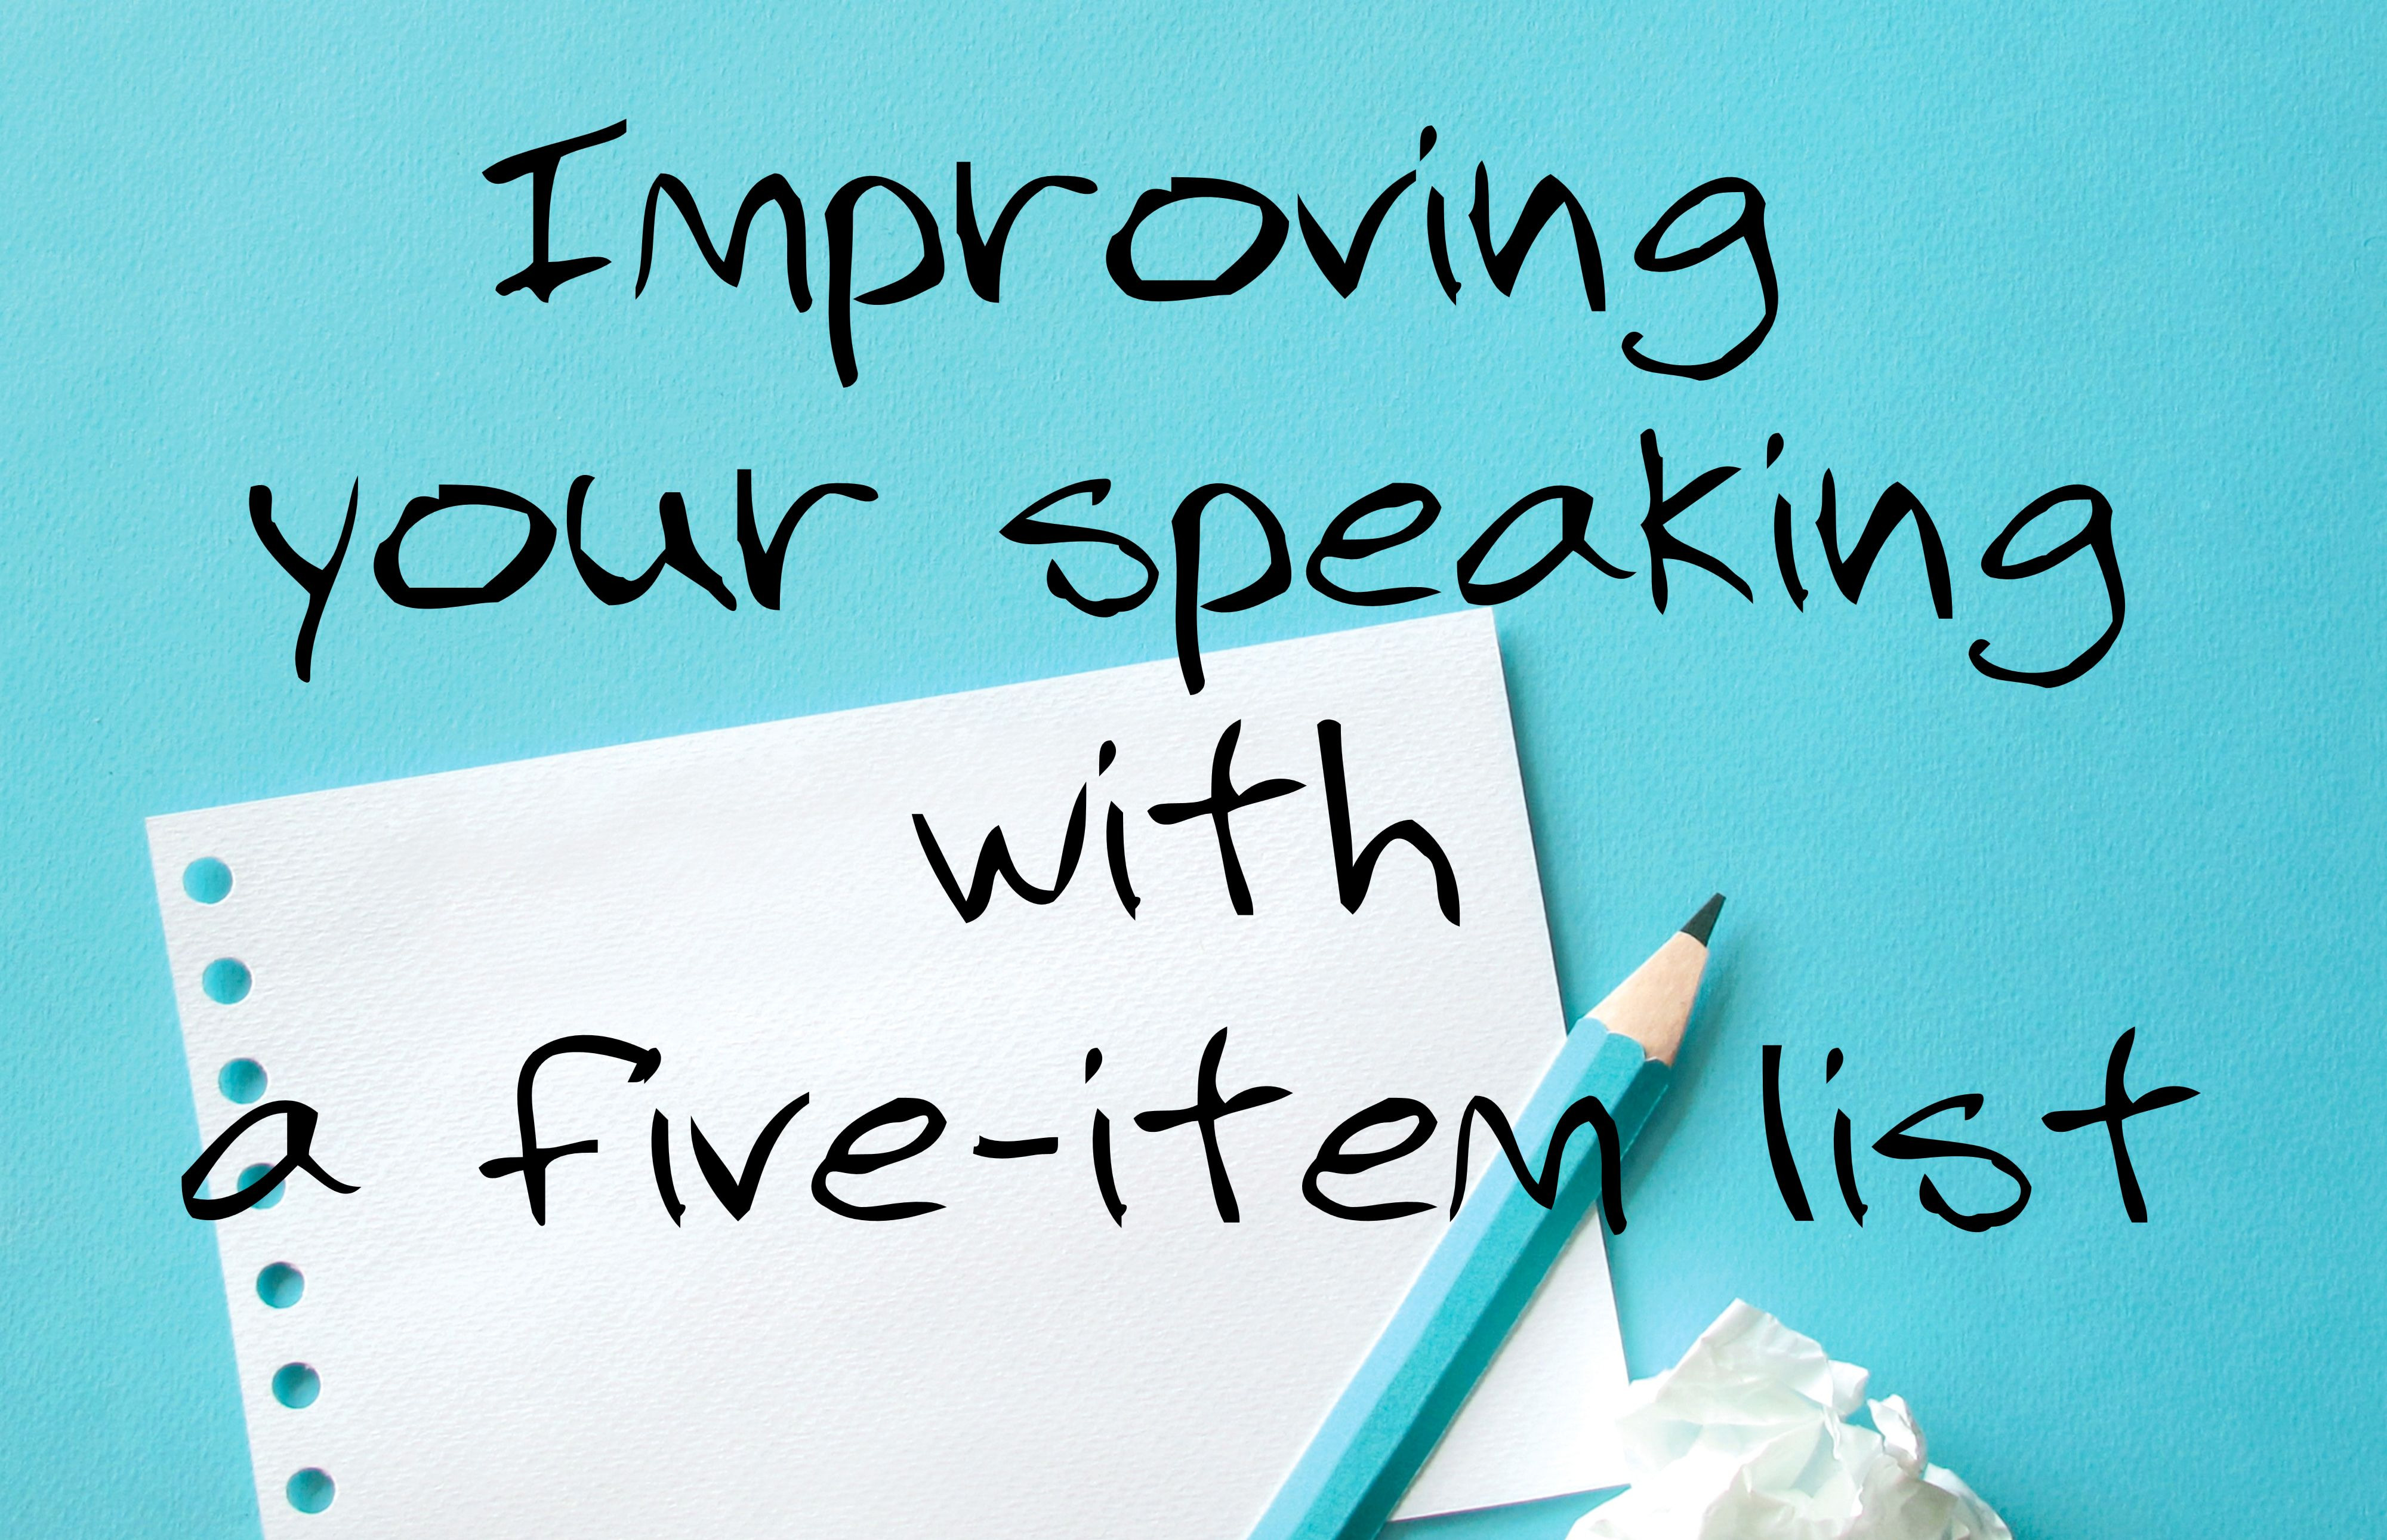 Improving your speaking with a five-item list